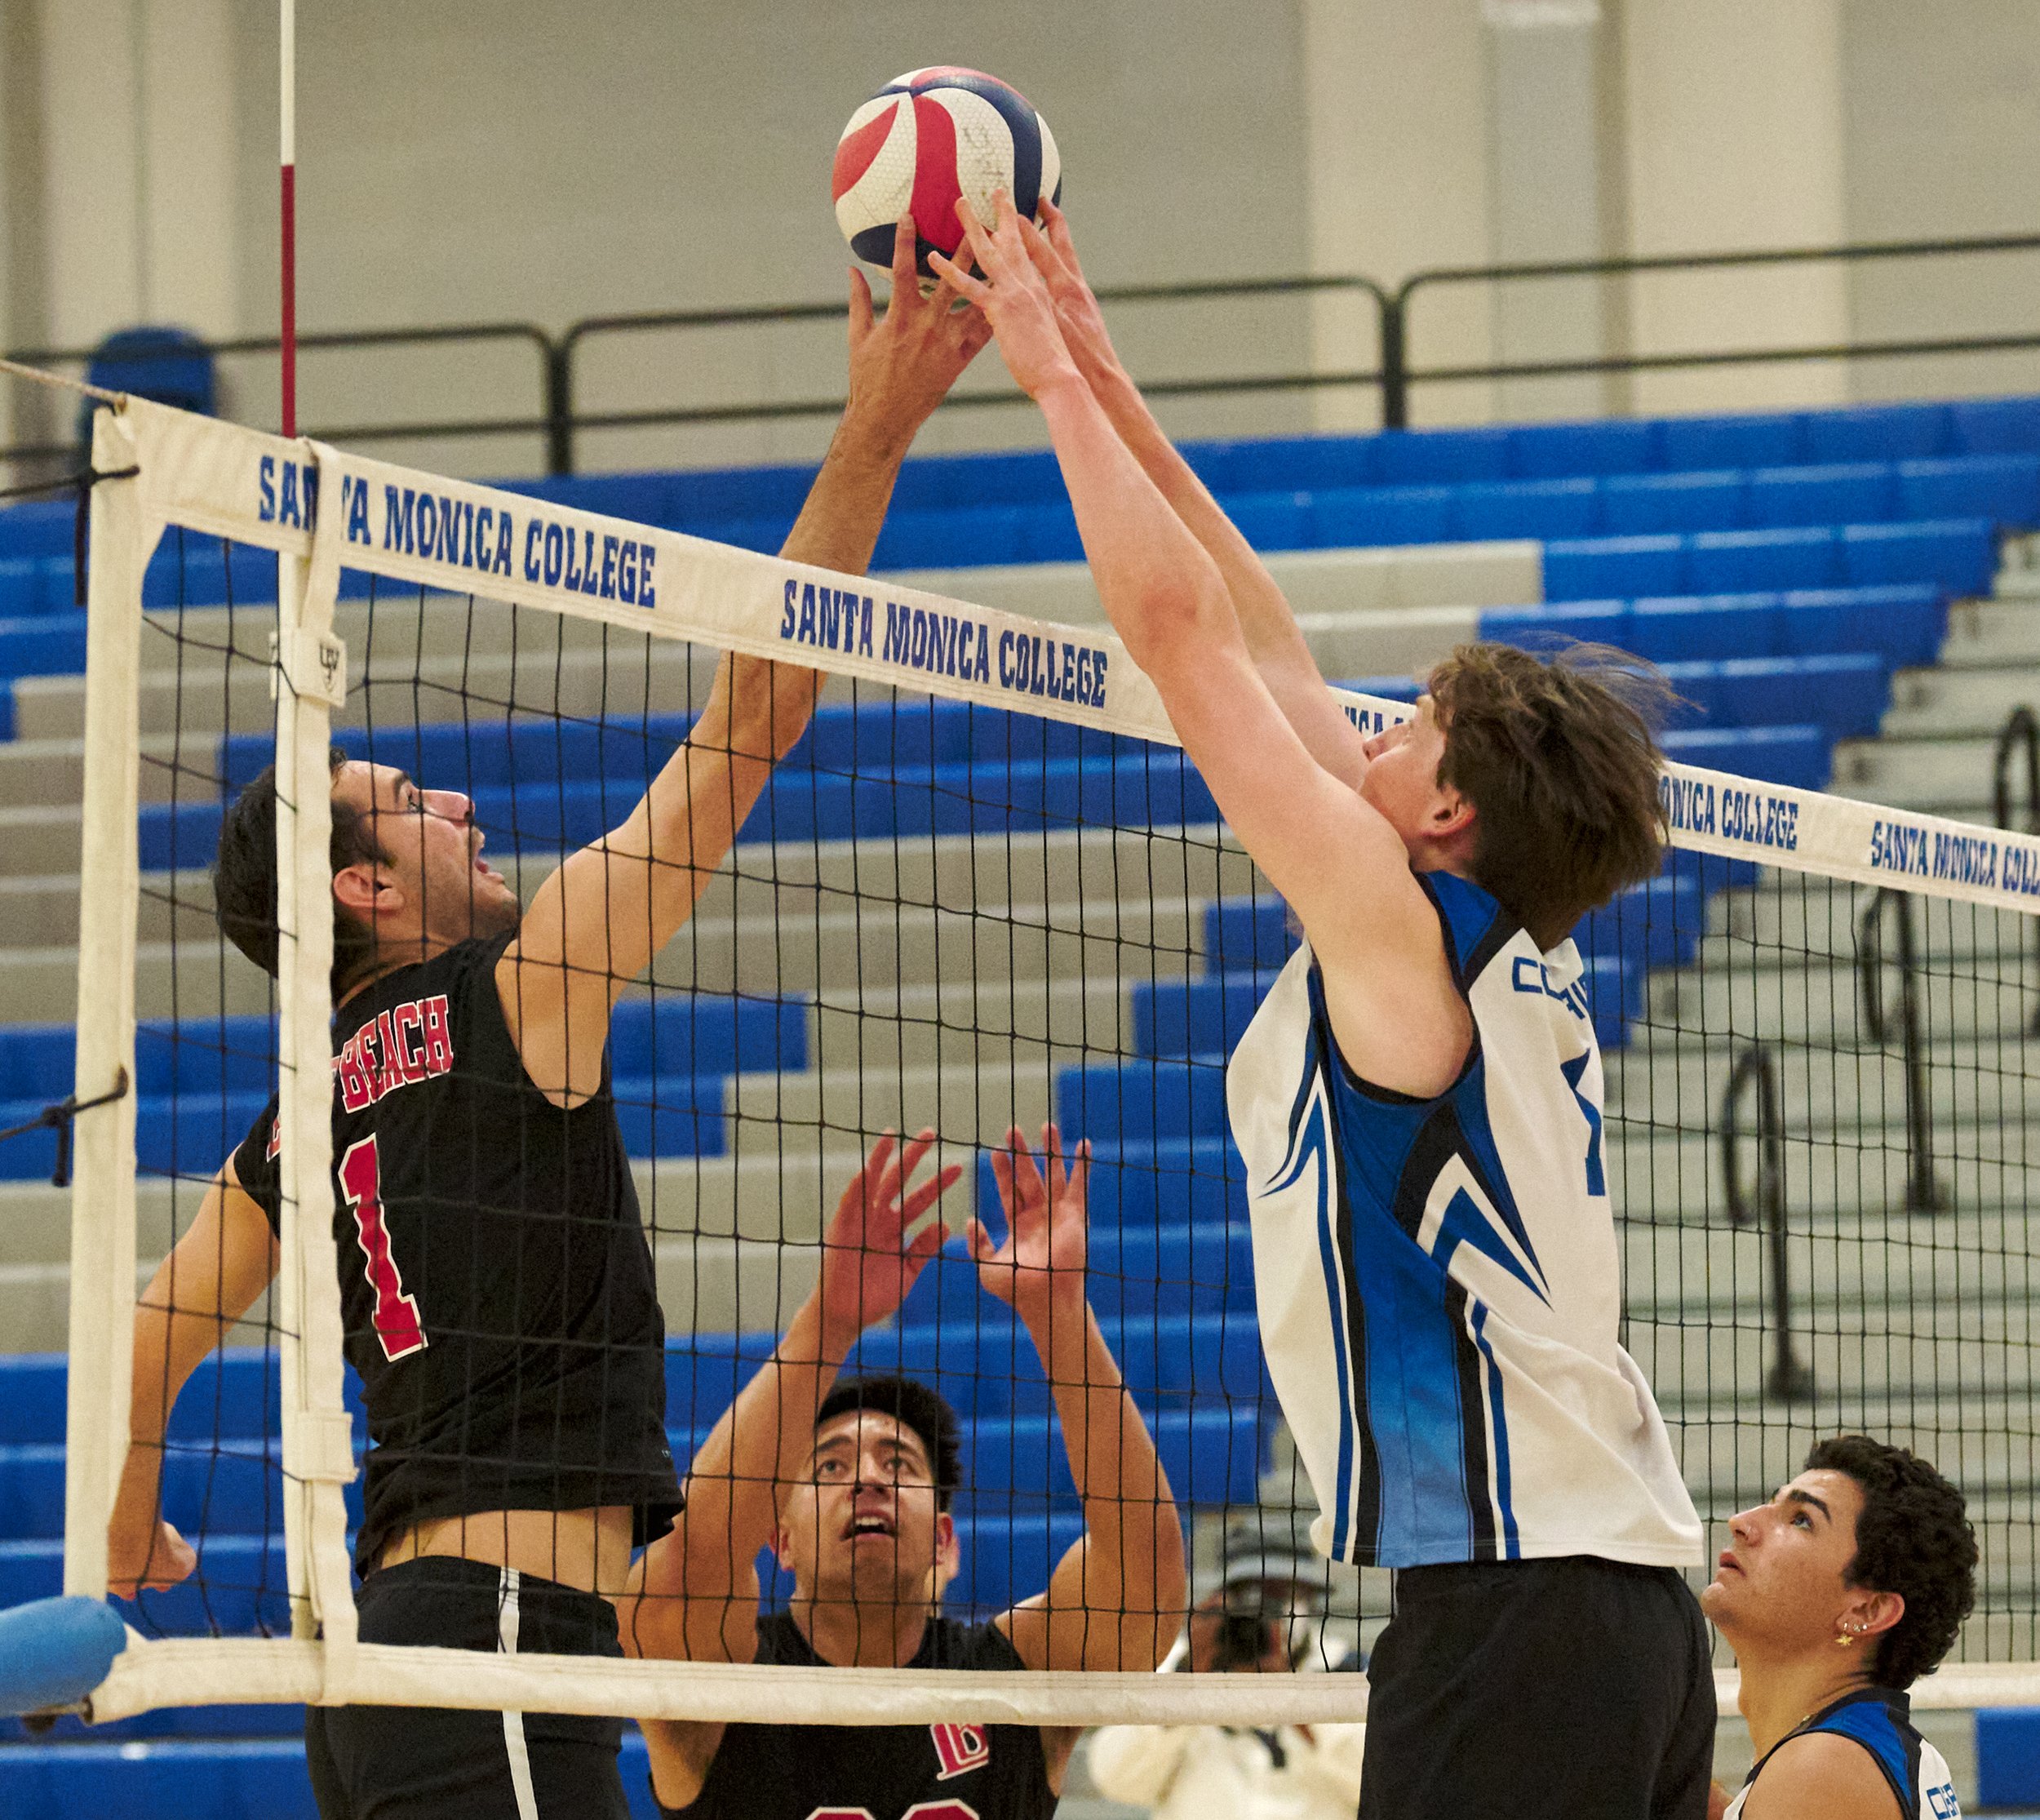  A joust between Joseph Rocha and Bryant Bardeau during the men's volleyball match between the Long Beach City College Vikings and the Santa Monica College Corsairs. Also pictured are Amery Leomiti for LBCC, and Sean Ortiz for SMC. (Nicholas McCall |